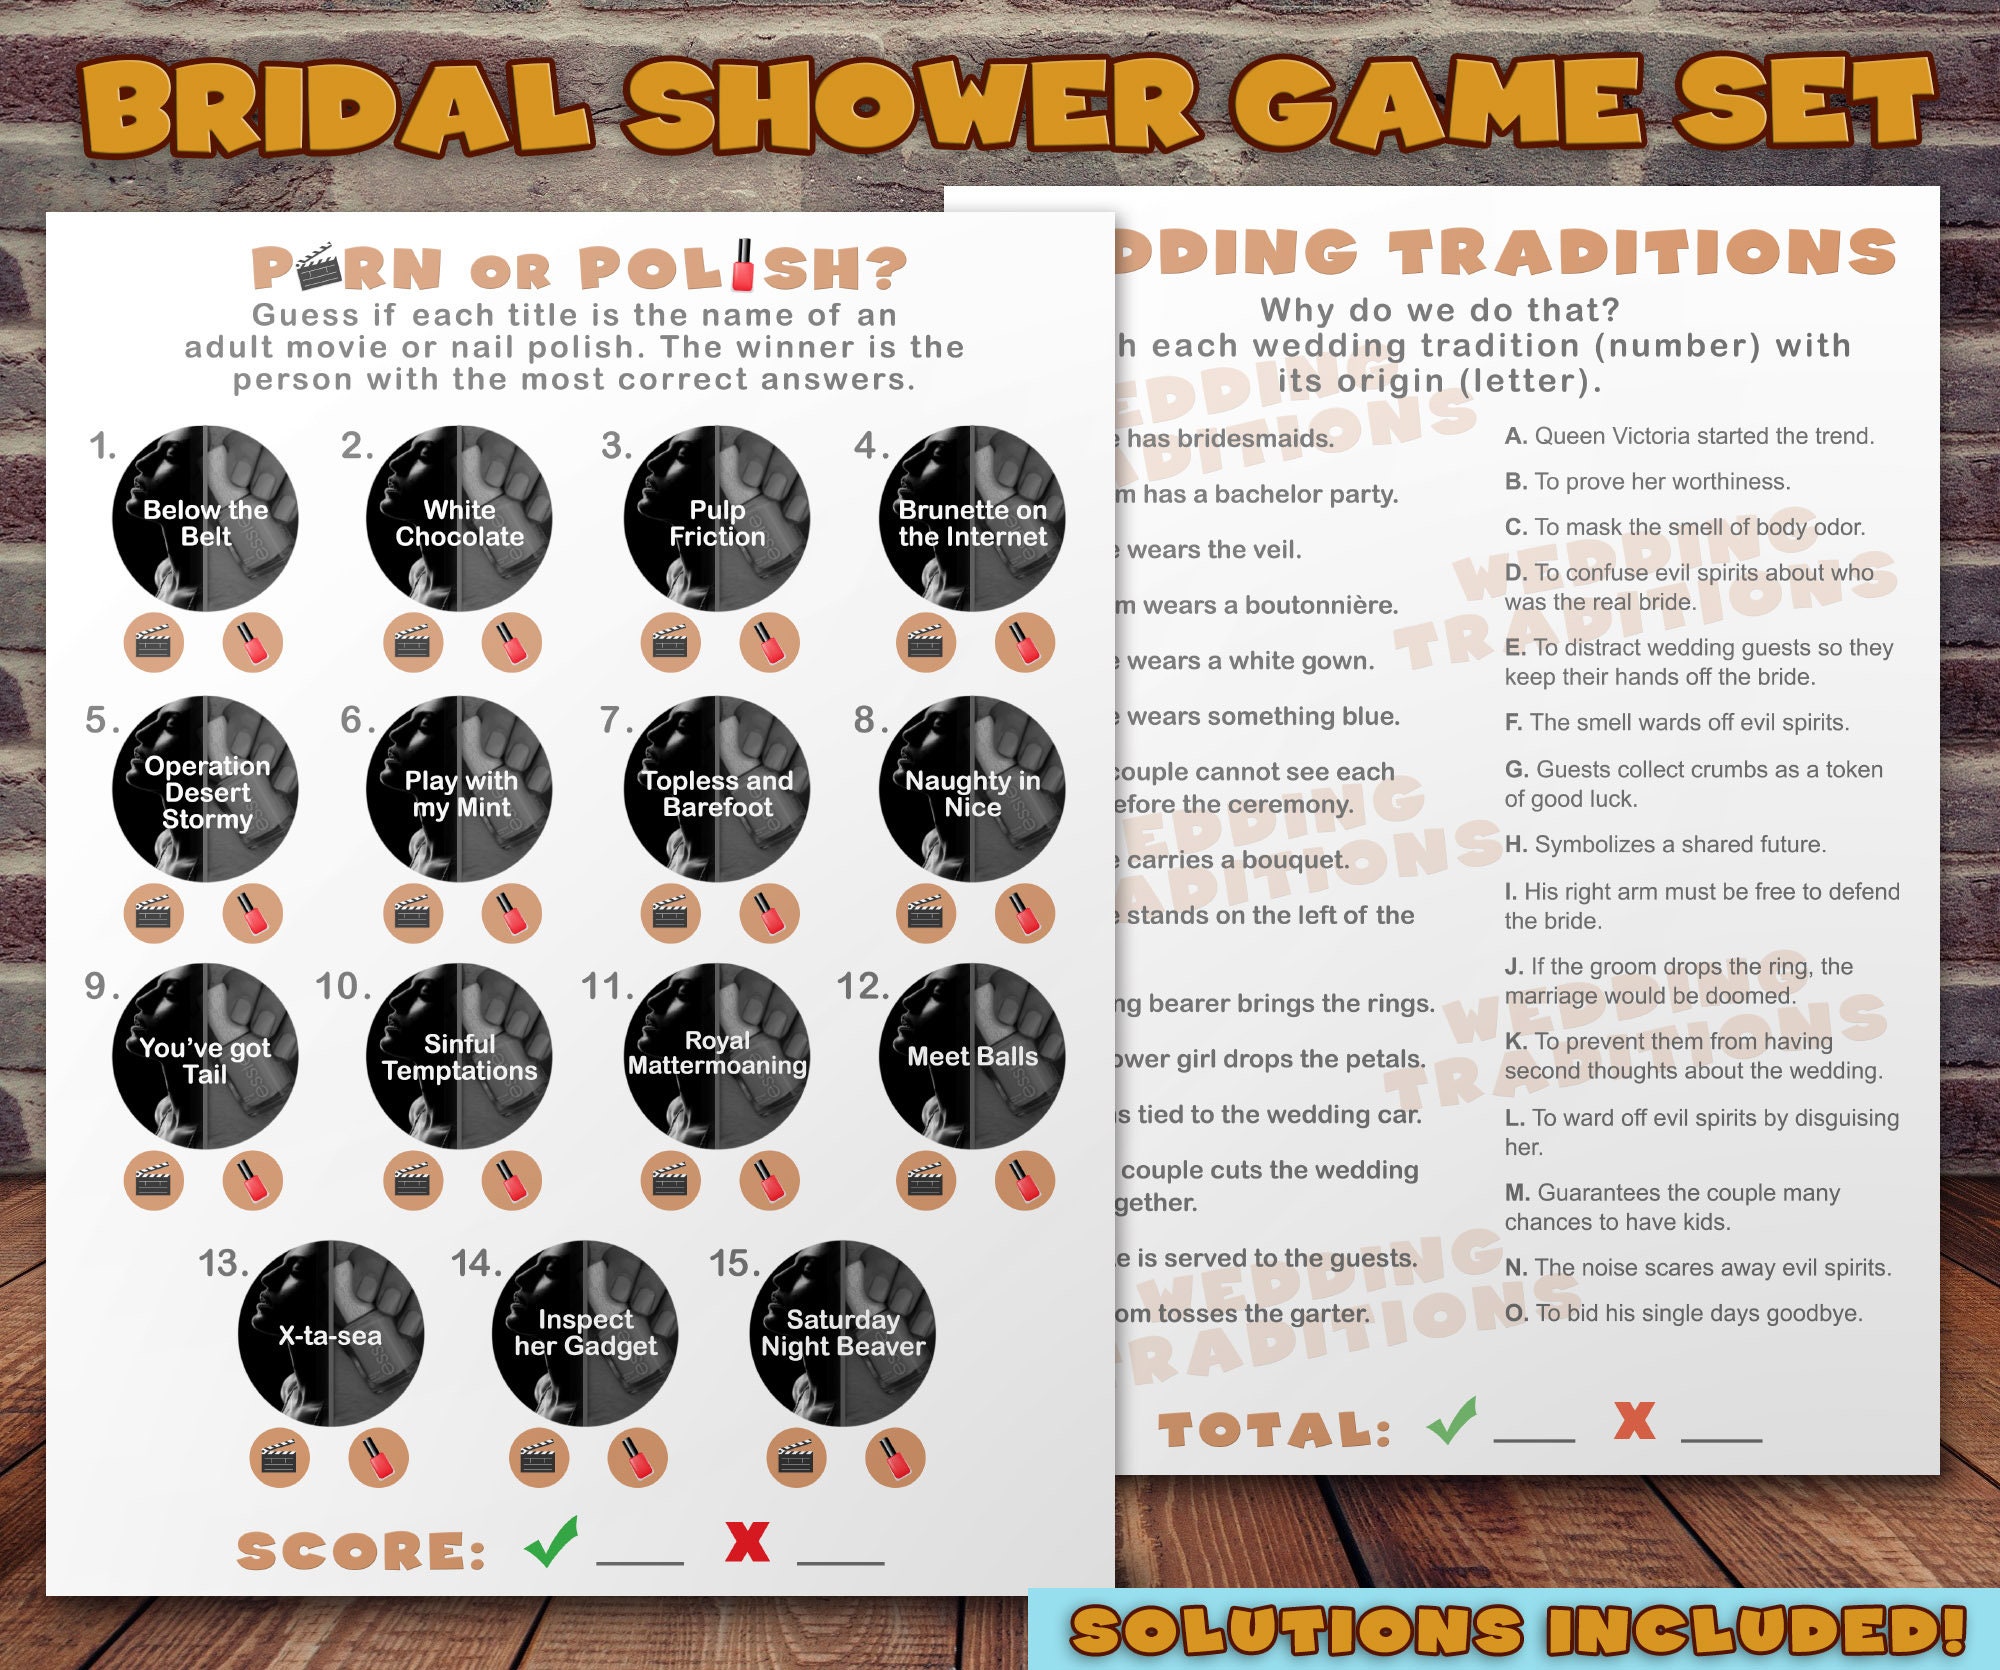 Porn Touch Games - Bridal Shower Game - Porn or Polish - Wedding Tradition ...